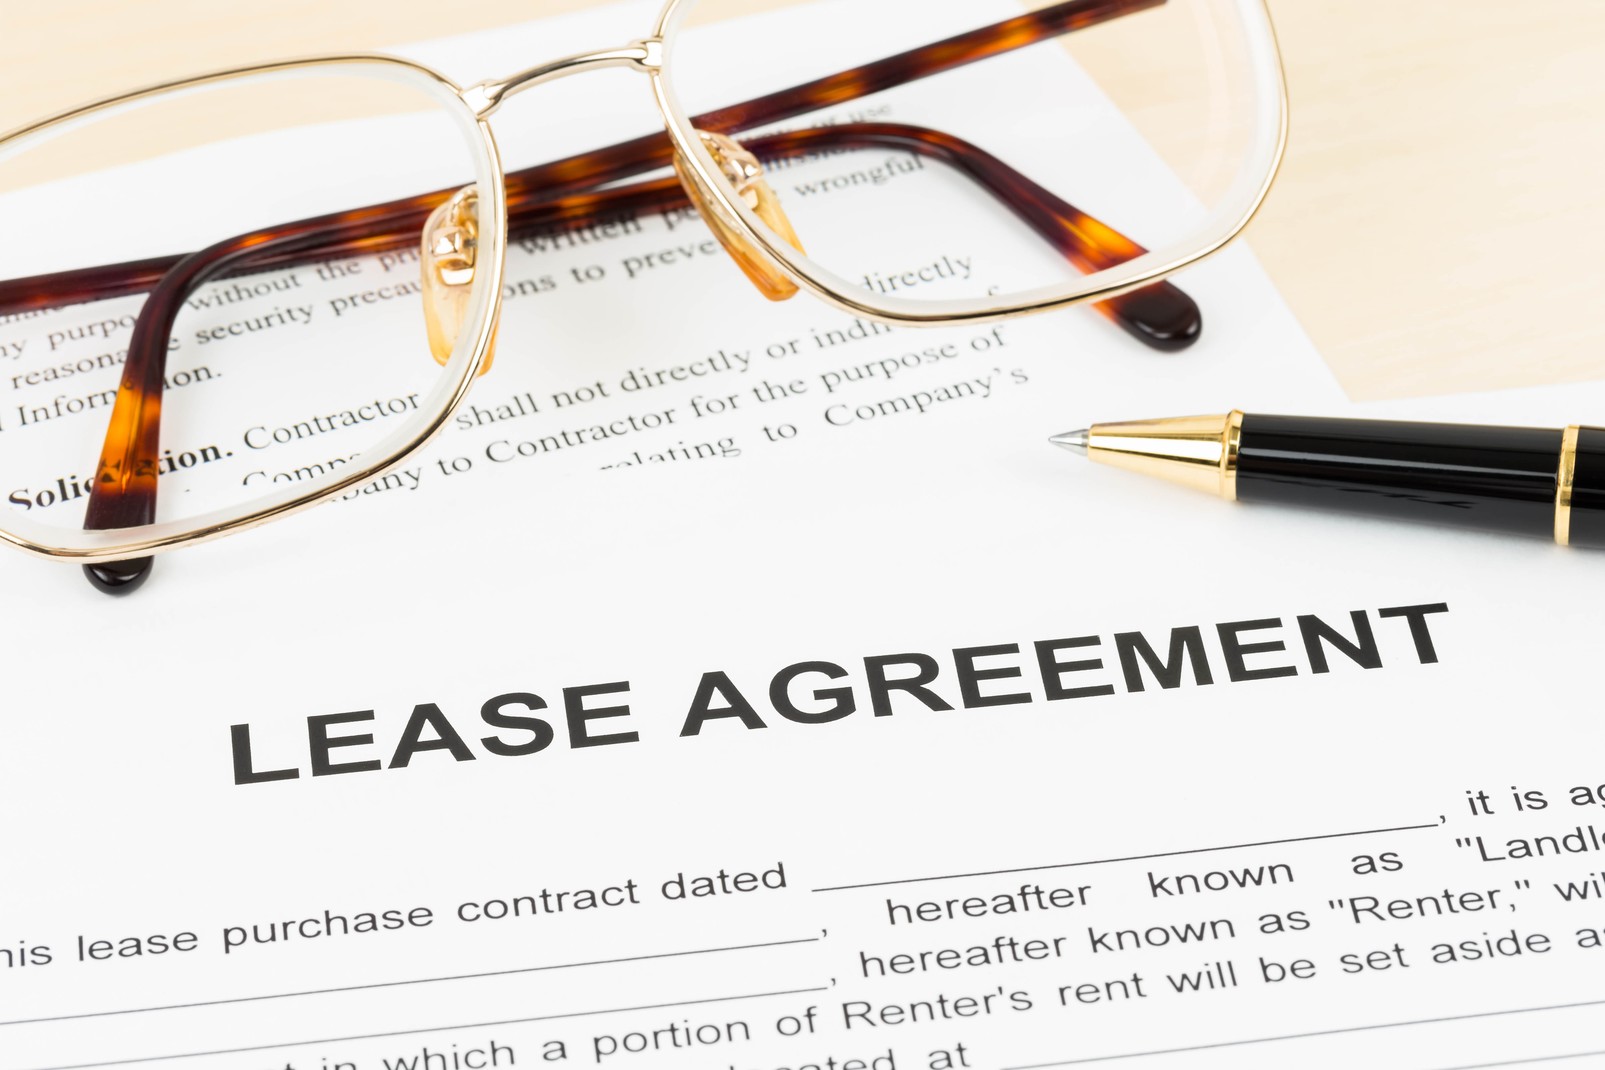 Lease Agreement картинки. Business Agreement document. Sales Contract. Rental Agreement.